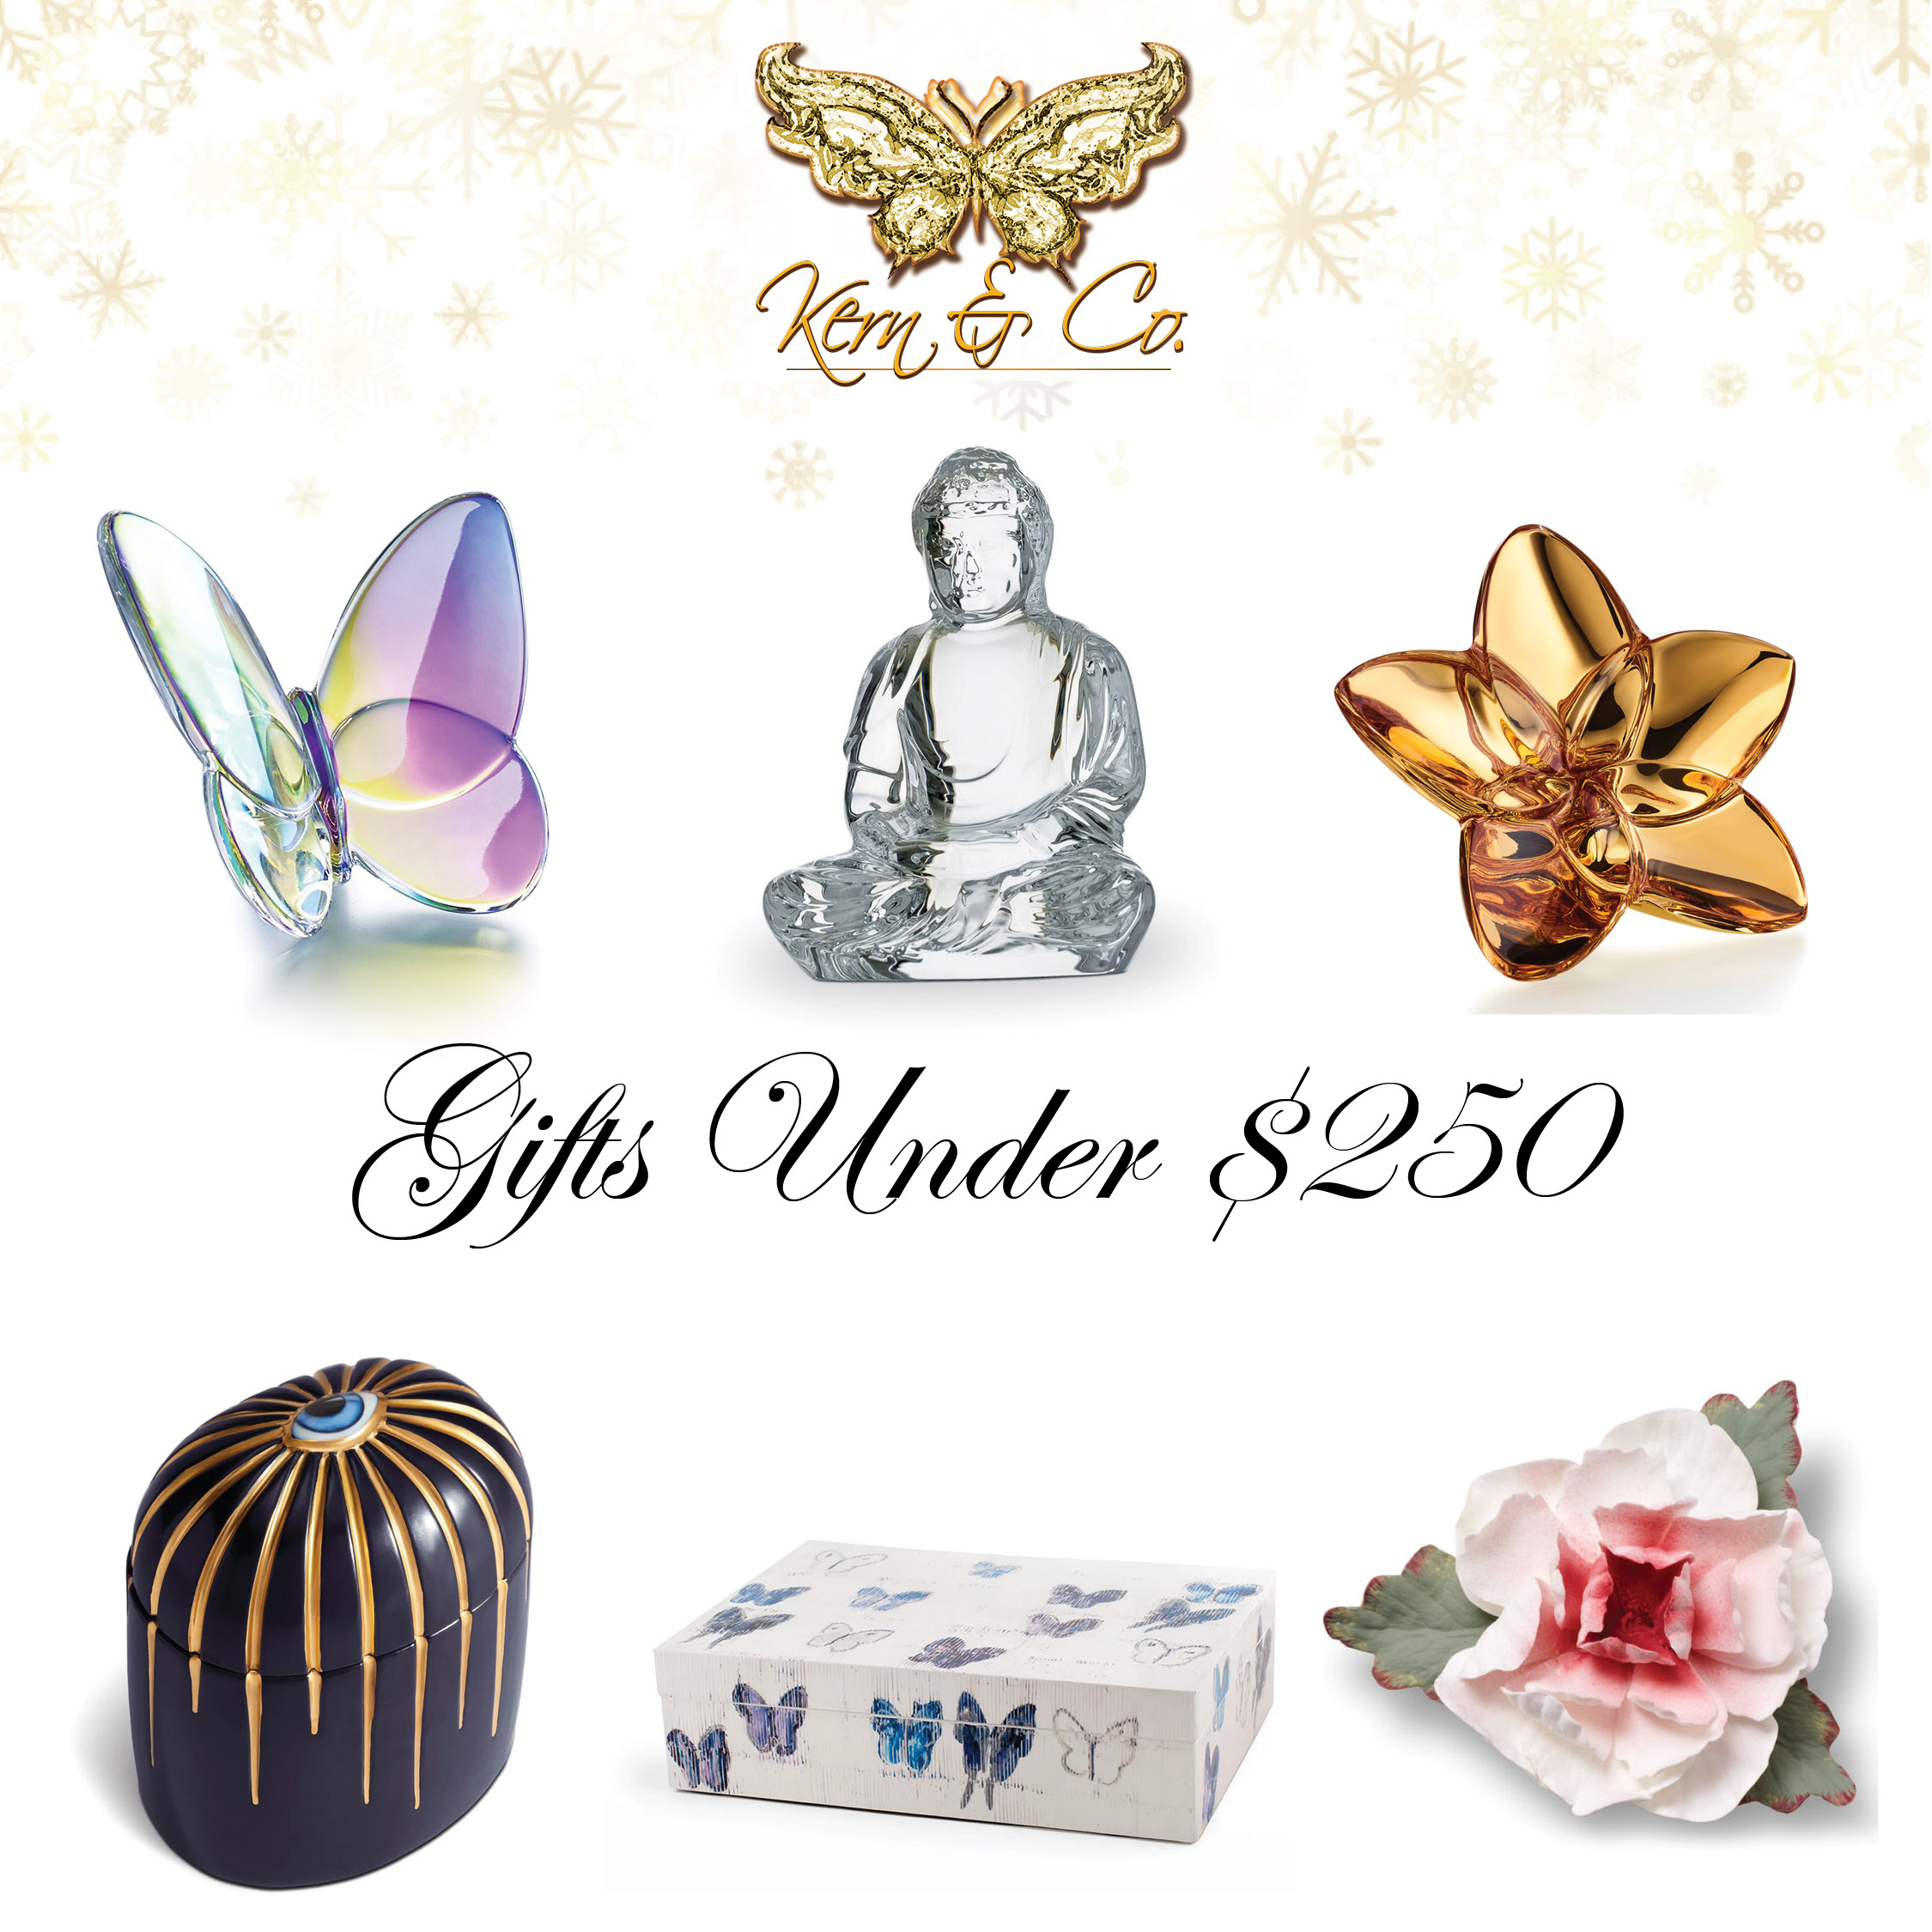 Luxury Gifts & Home Decor Gifts, Gift Ideas